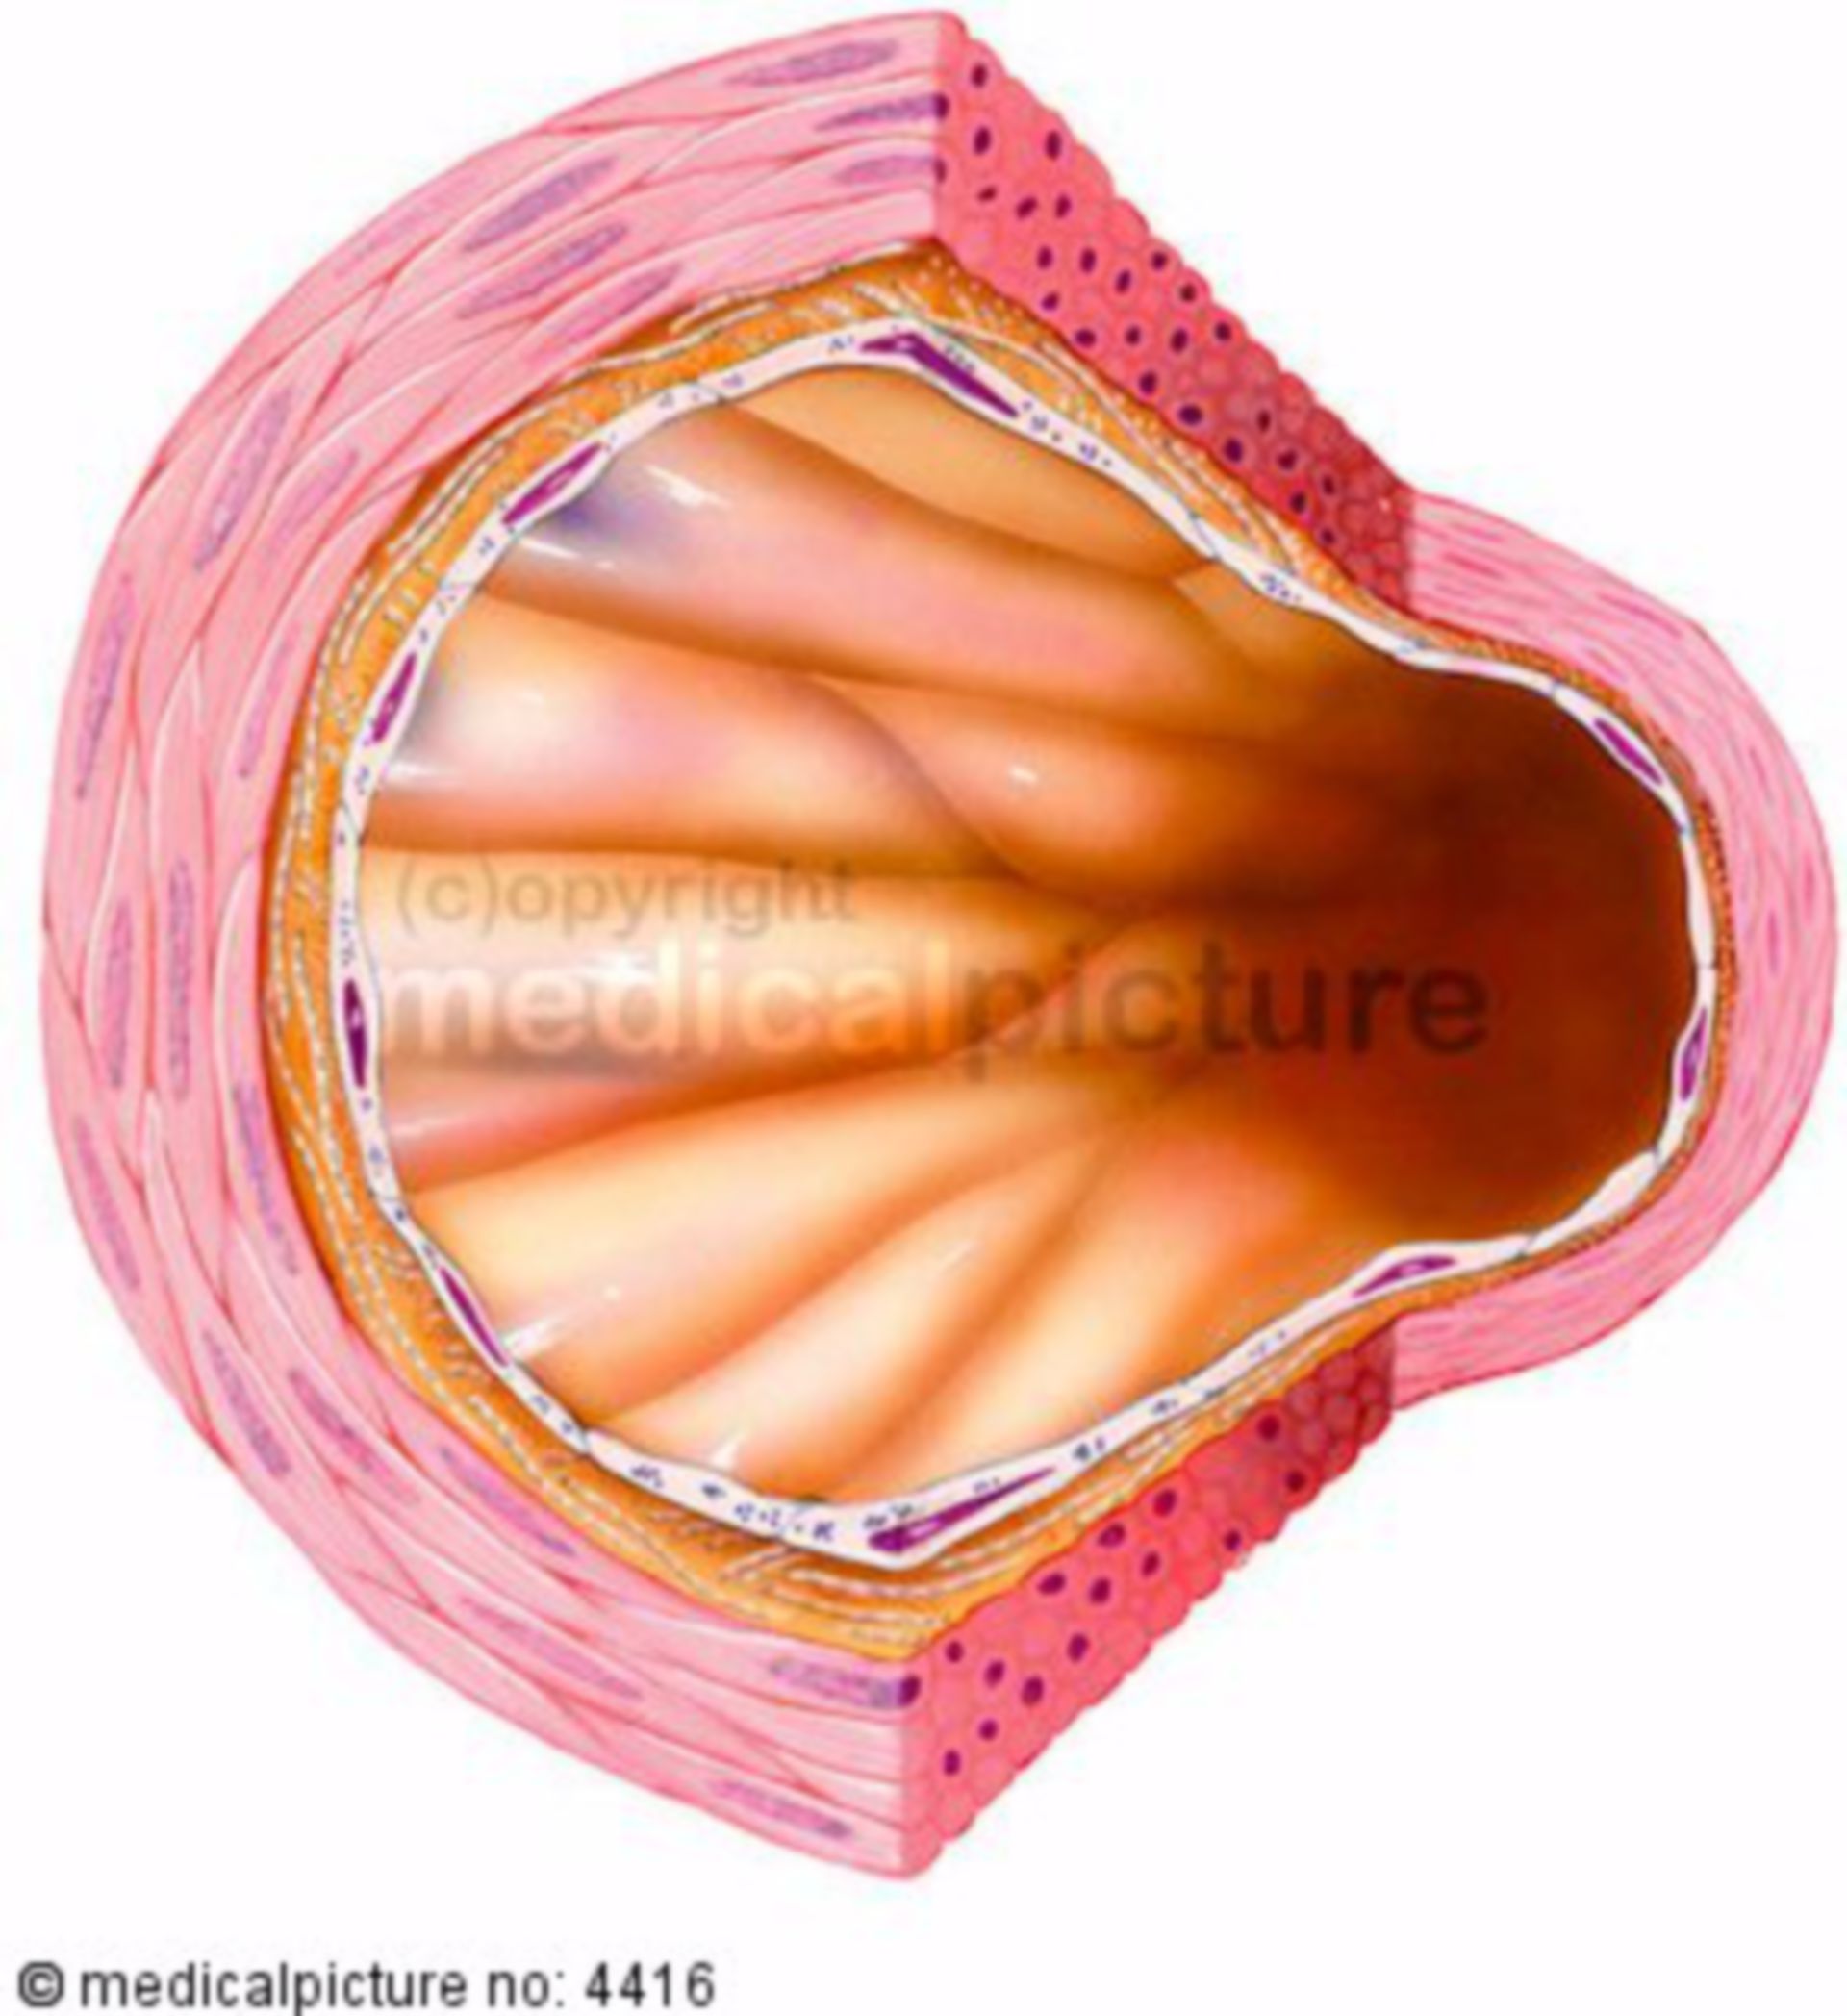 Artery, structure of the vascular wall